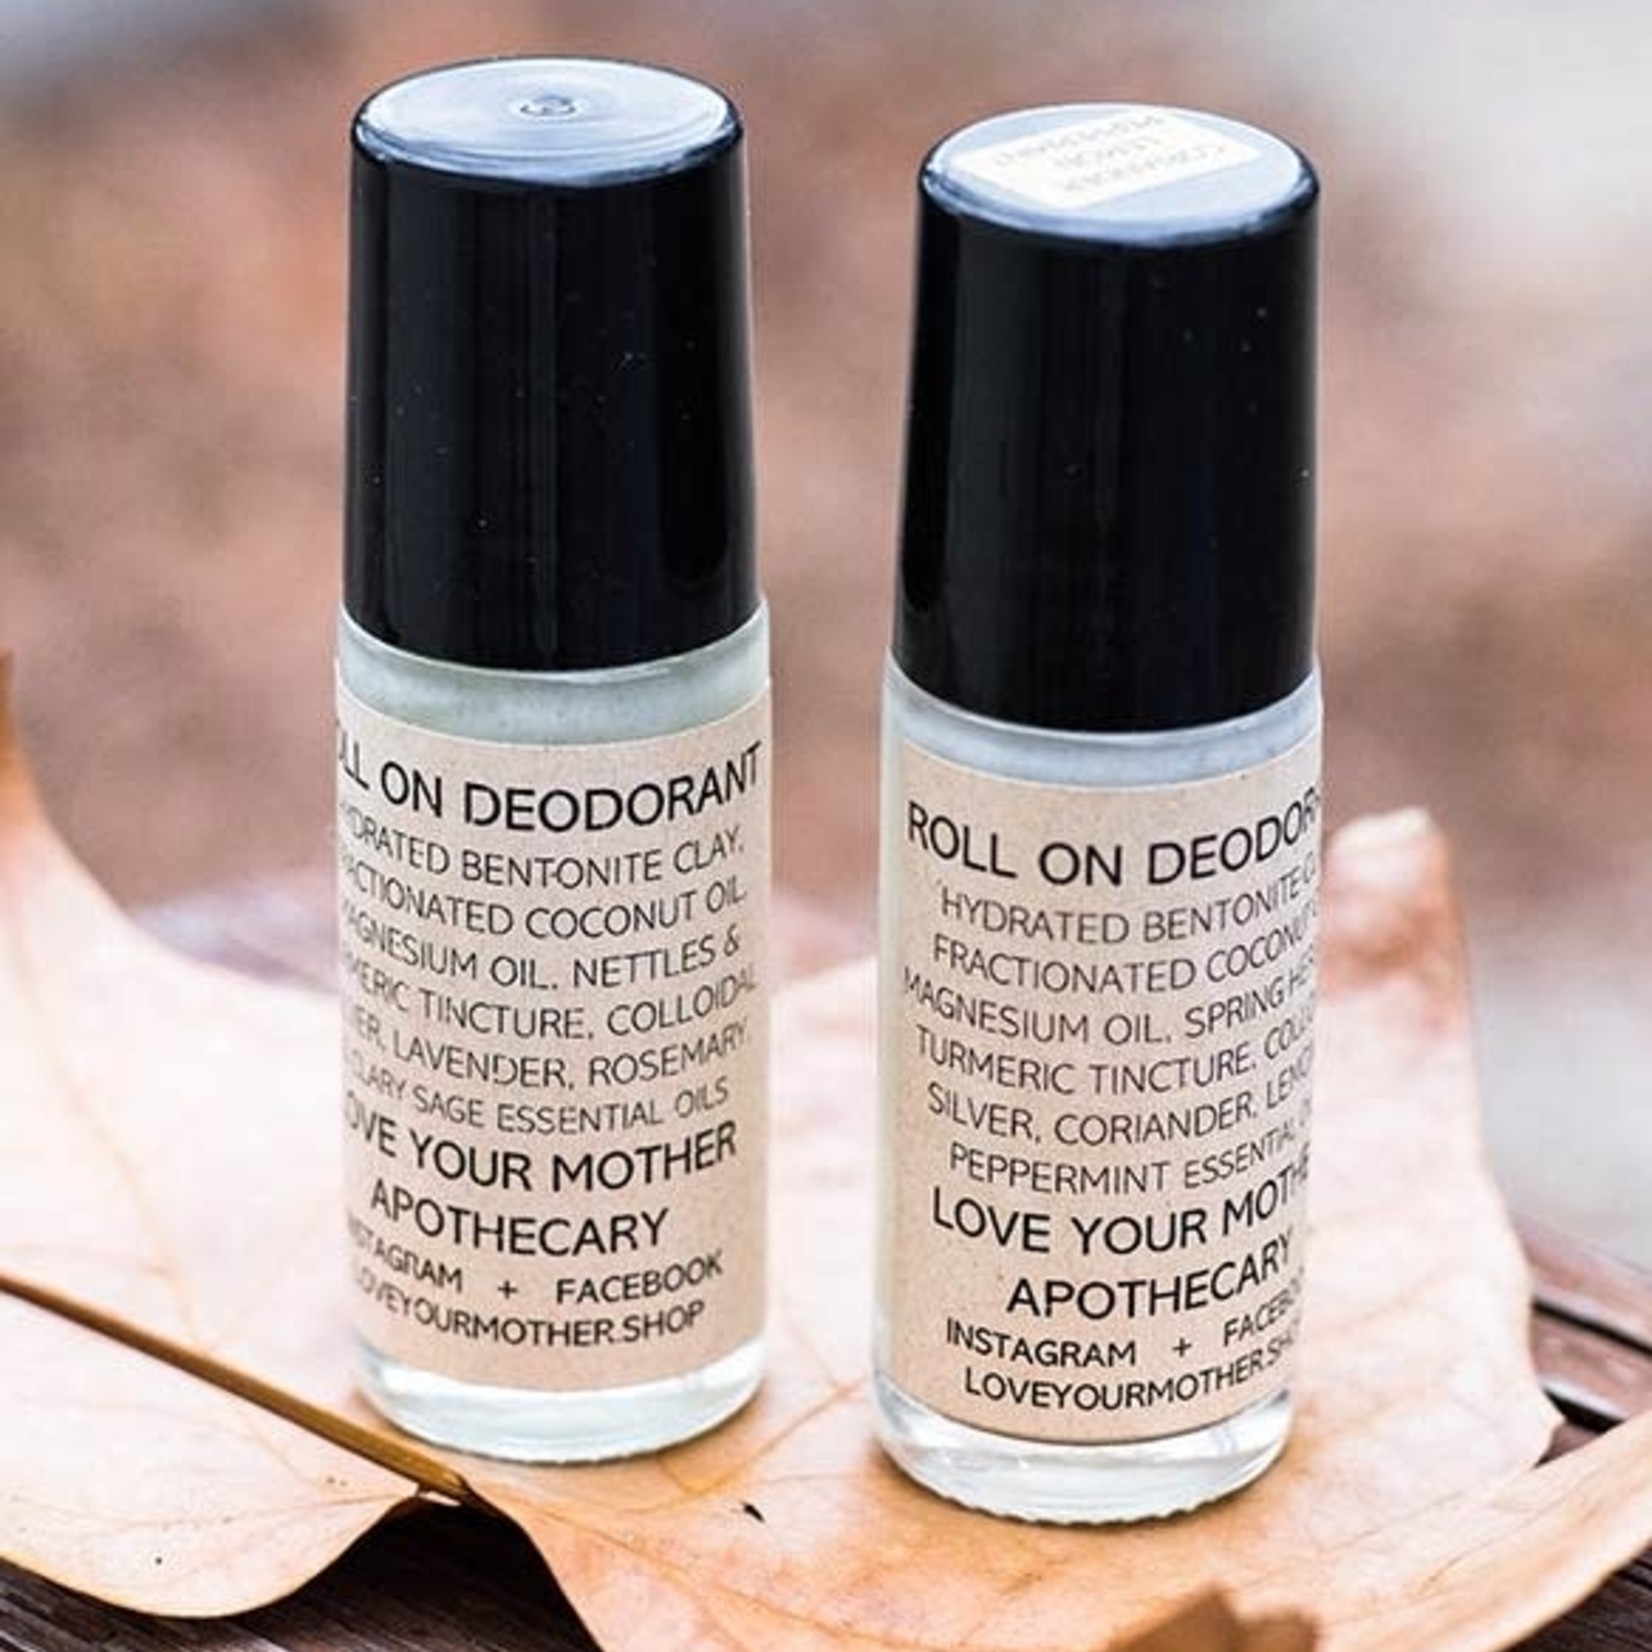 Love Your Mother Roll On Deodorant by Love Your Mother Apothecary (Local)